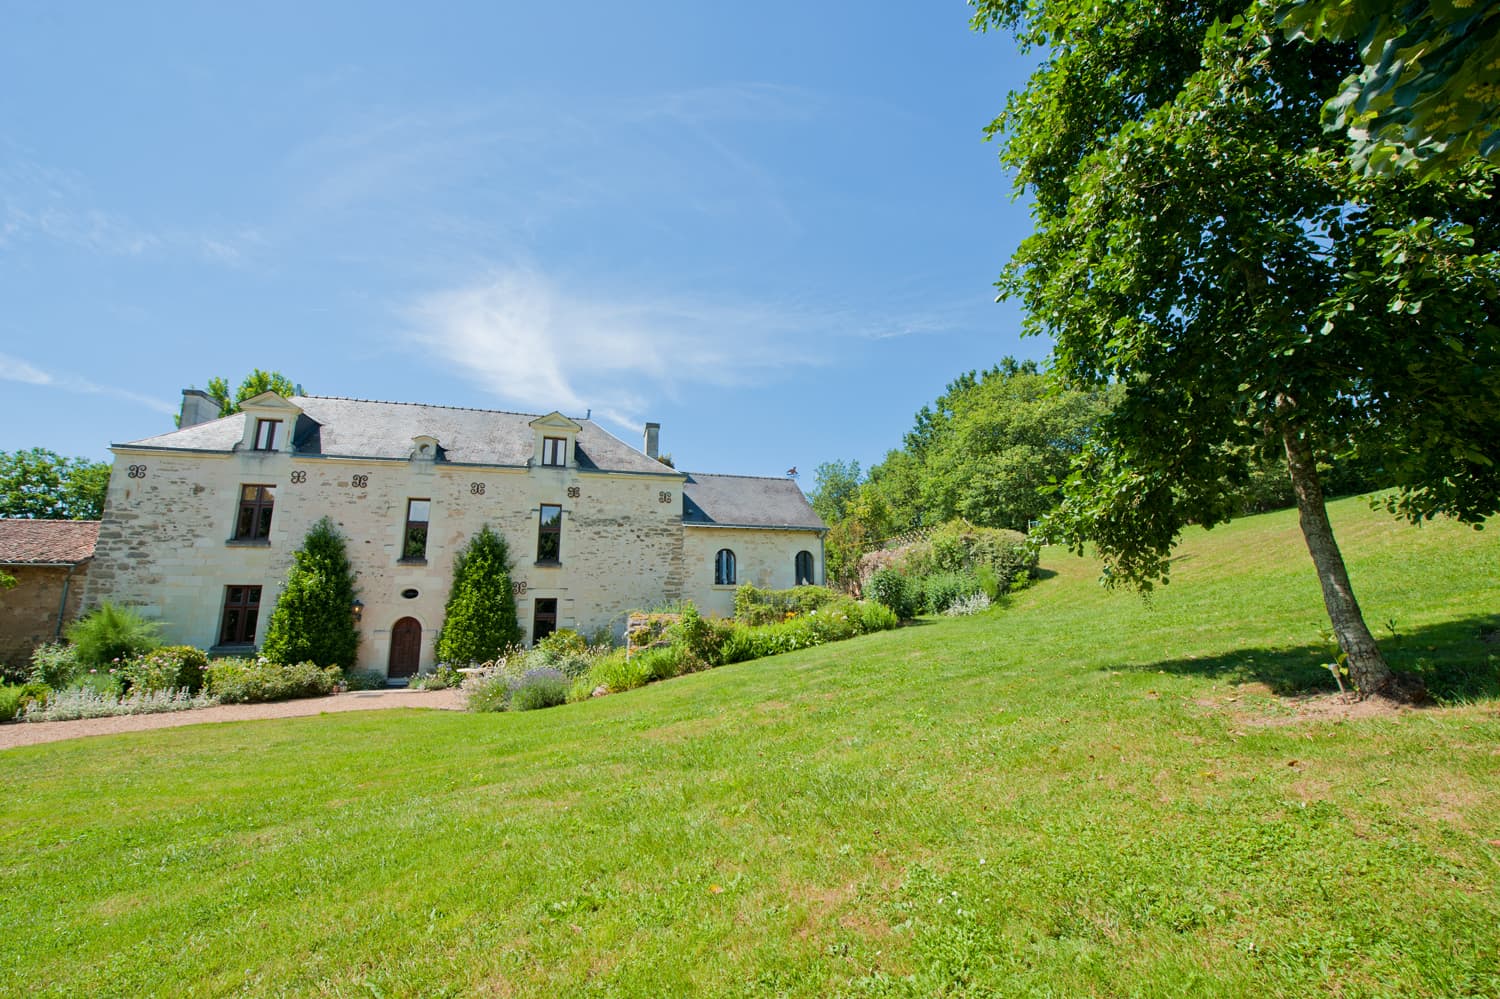 Holiday home with private pool and countryside setting in the Loire Valley | Manoir Coteaux